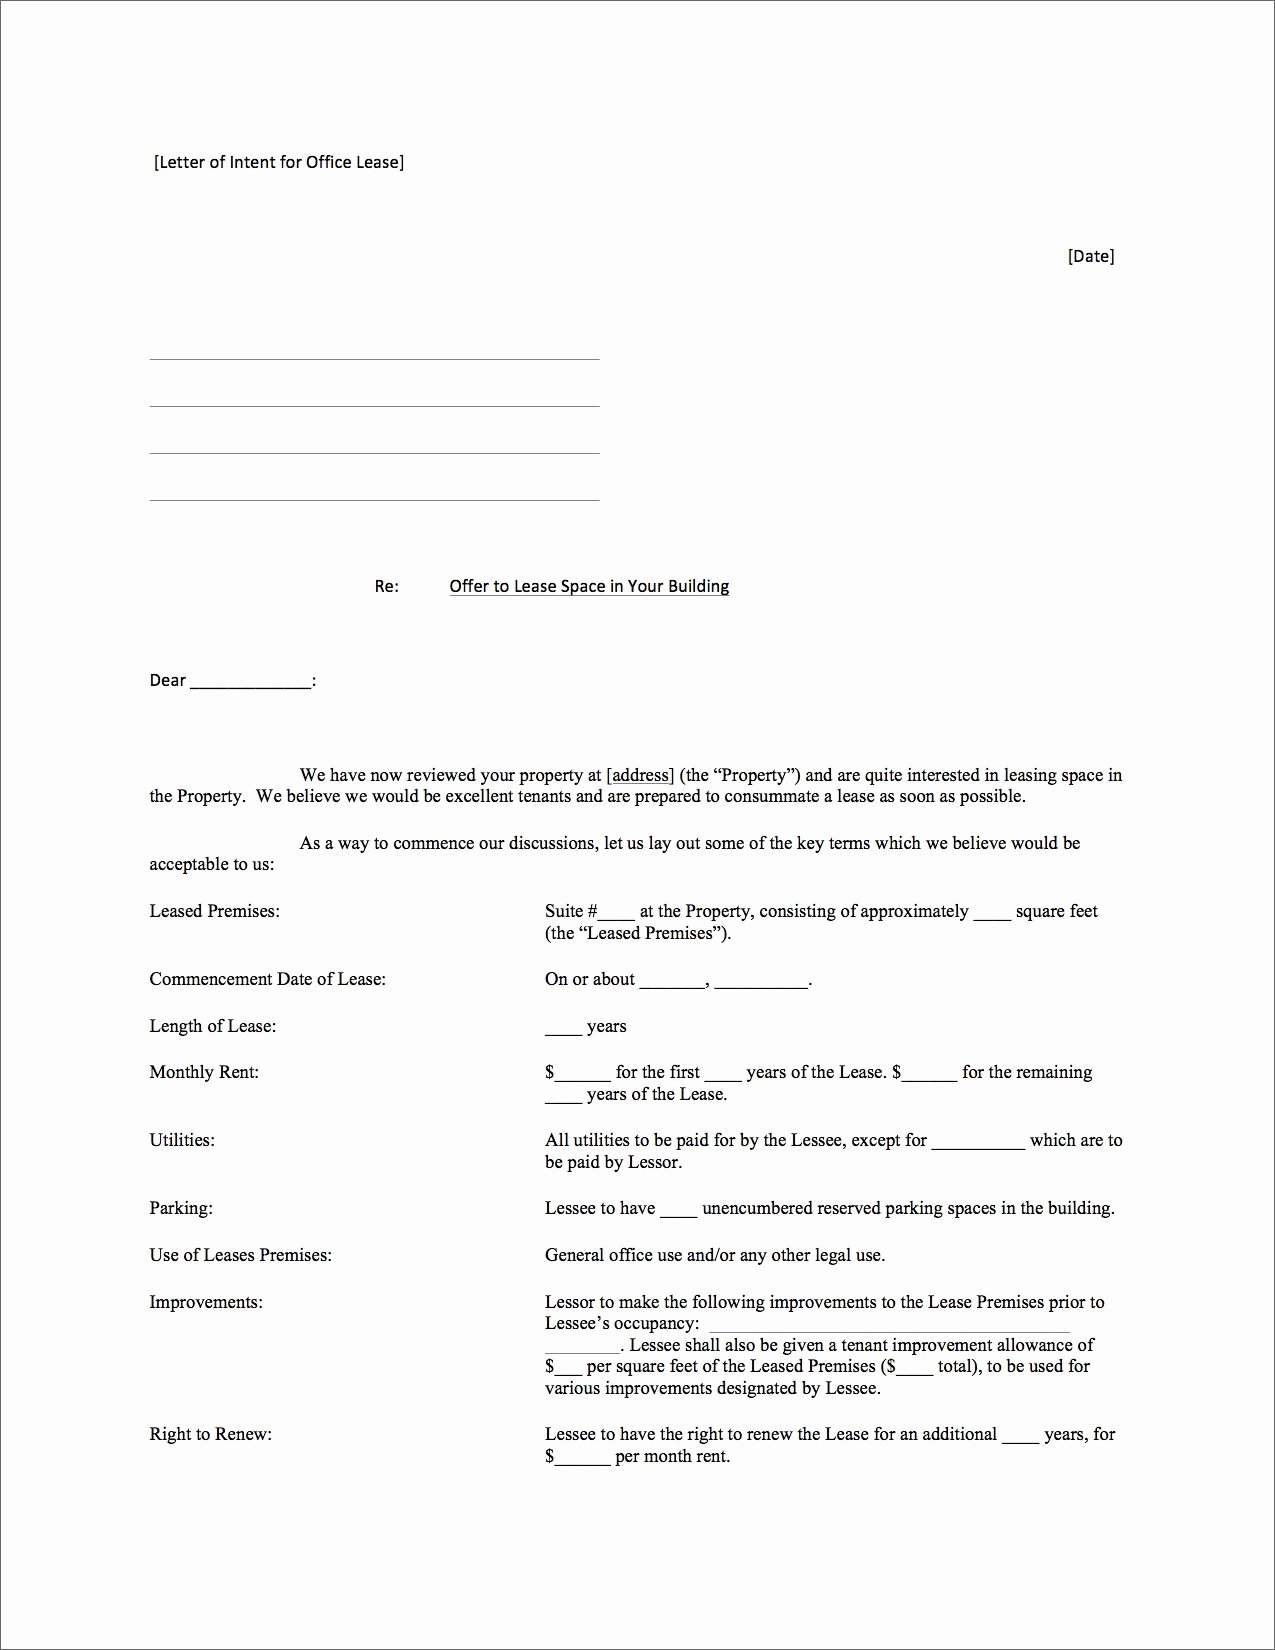 Sample Letter Of Intent to Lease Commercial Retail Space Lovely How to Negotiate the Best Fice Lease for Your Startup